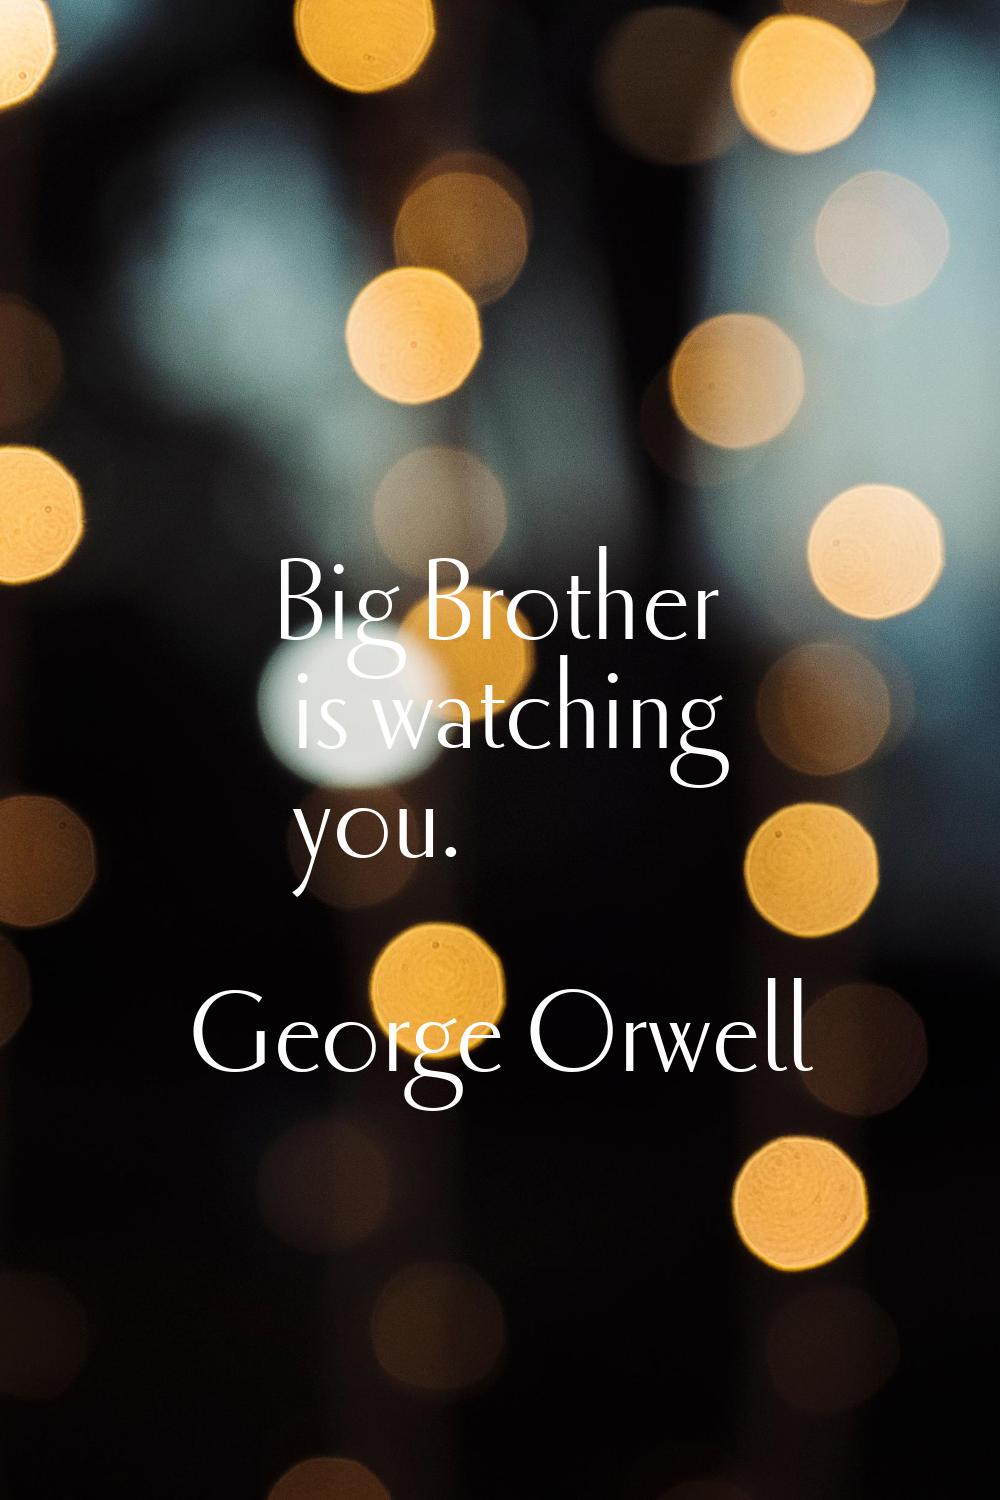 Big Brother is watching you.